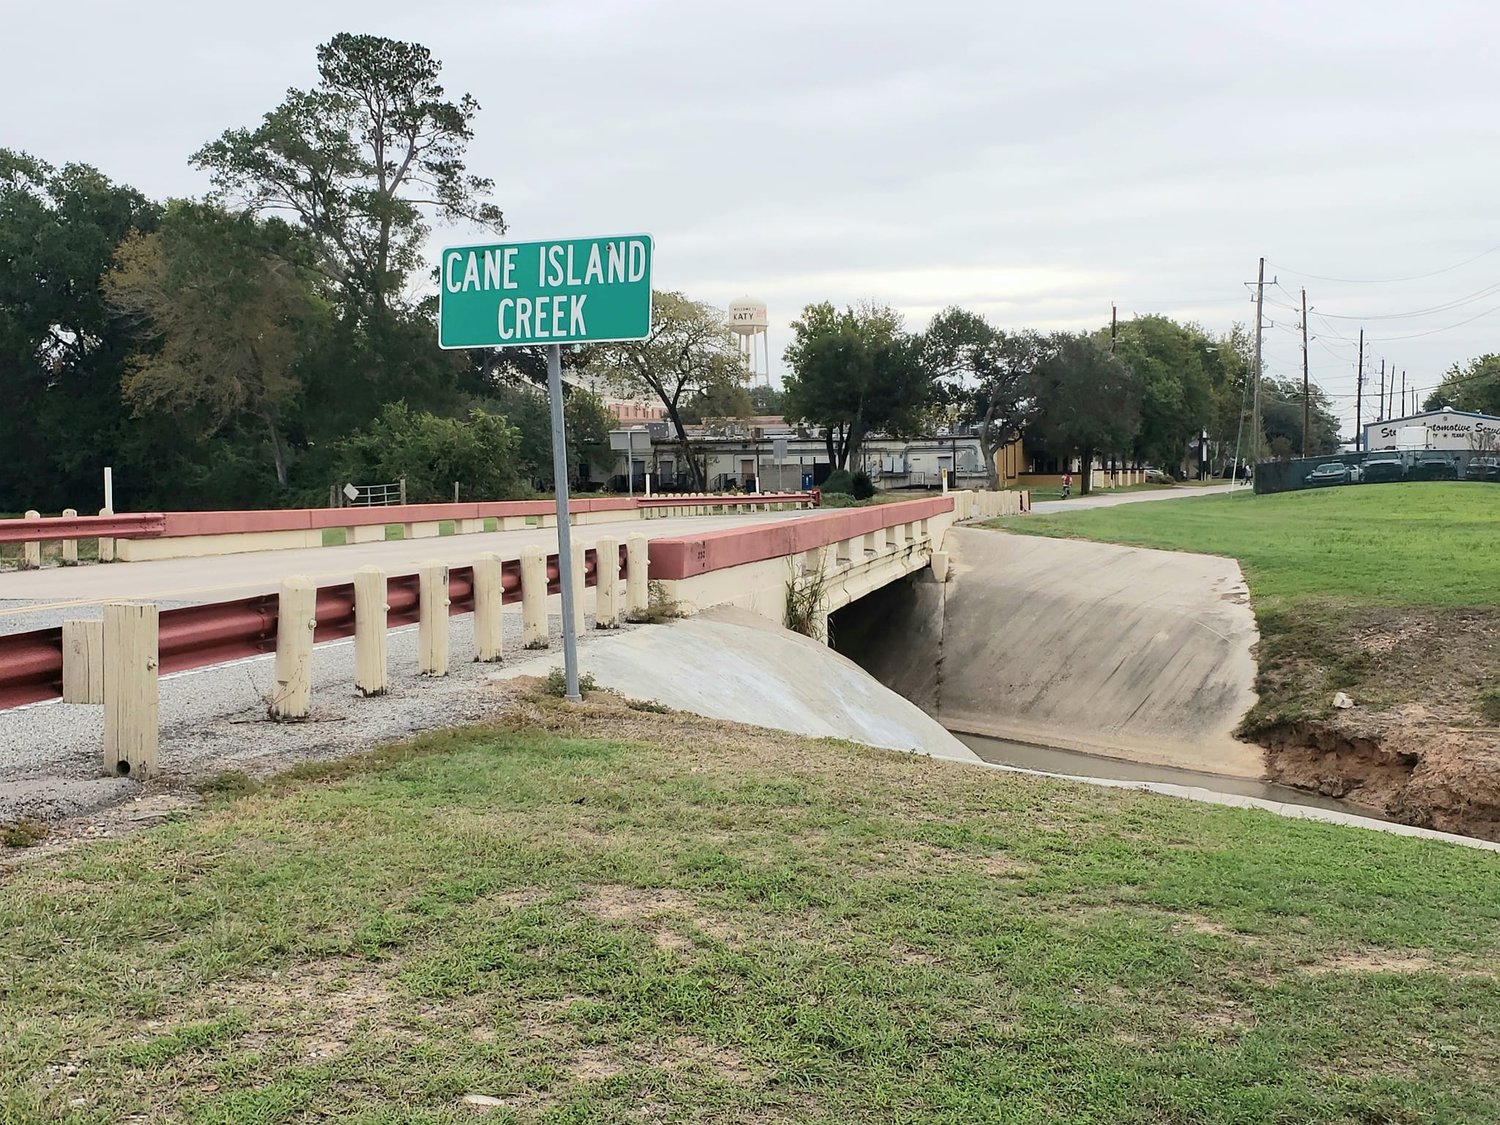 The Katy City Council authorized the reconstruction of the First Street bridge.